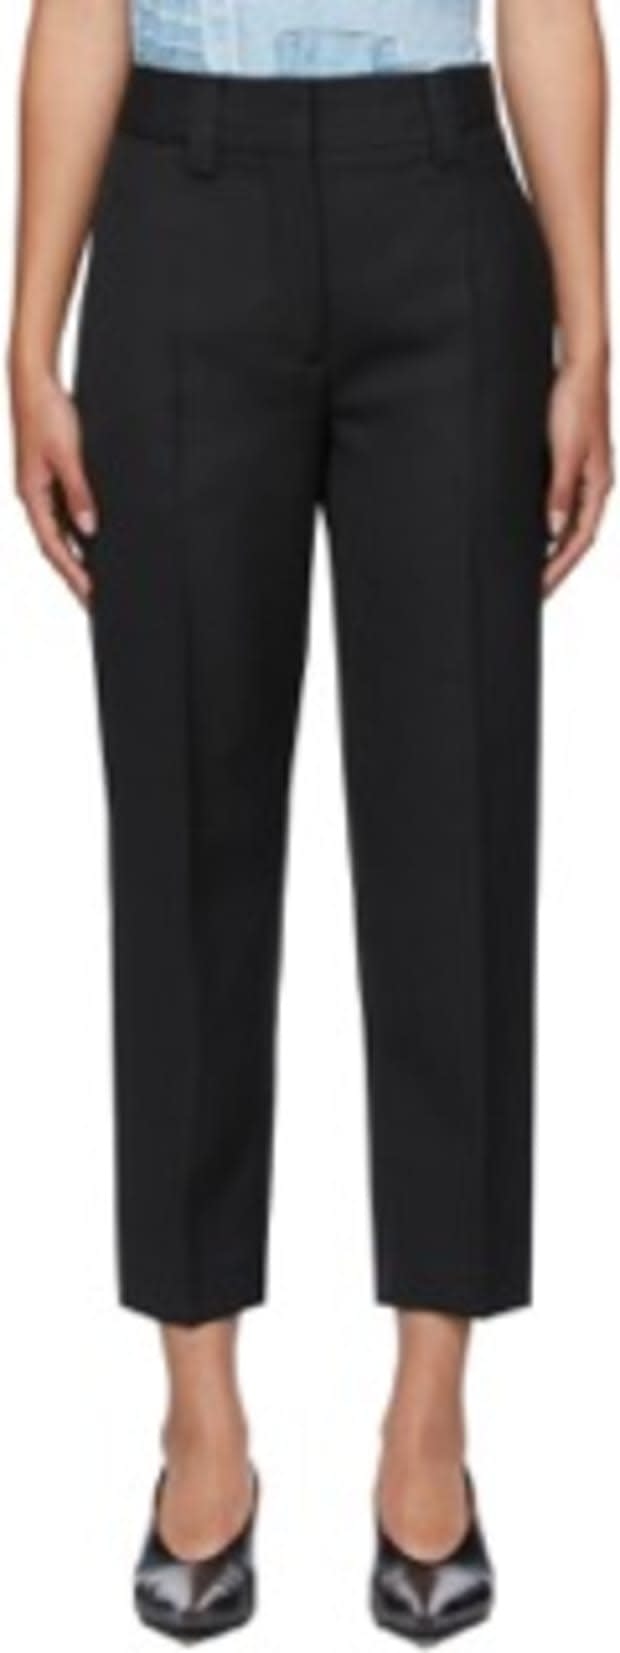 <p>Acne Studios Black Wool Tapered Trousers, $390, <a href="https://rstyle.me/+46fhS8aZAaRZNqRXsAc9ug" rel="nofollow noopener" target="_blank" data-ylk="slk:available here" class="link ">available here</a> (sizes 24-34).</p>